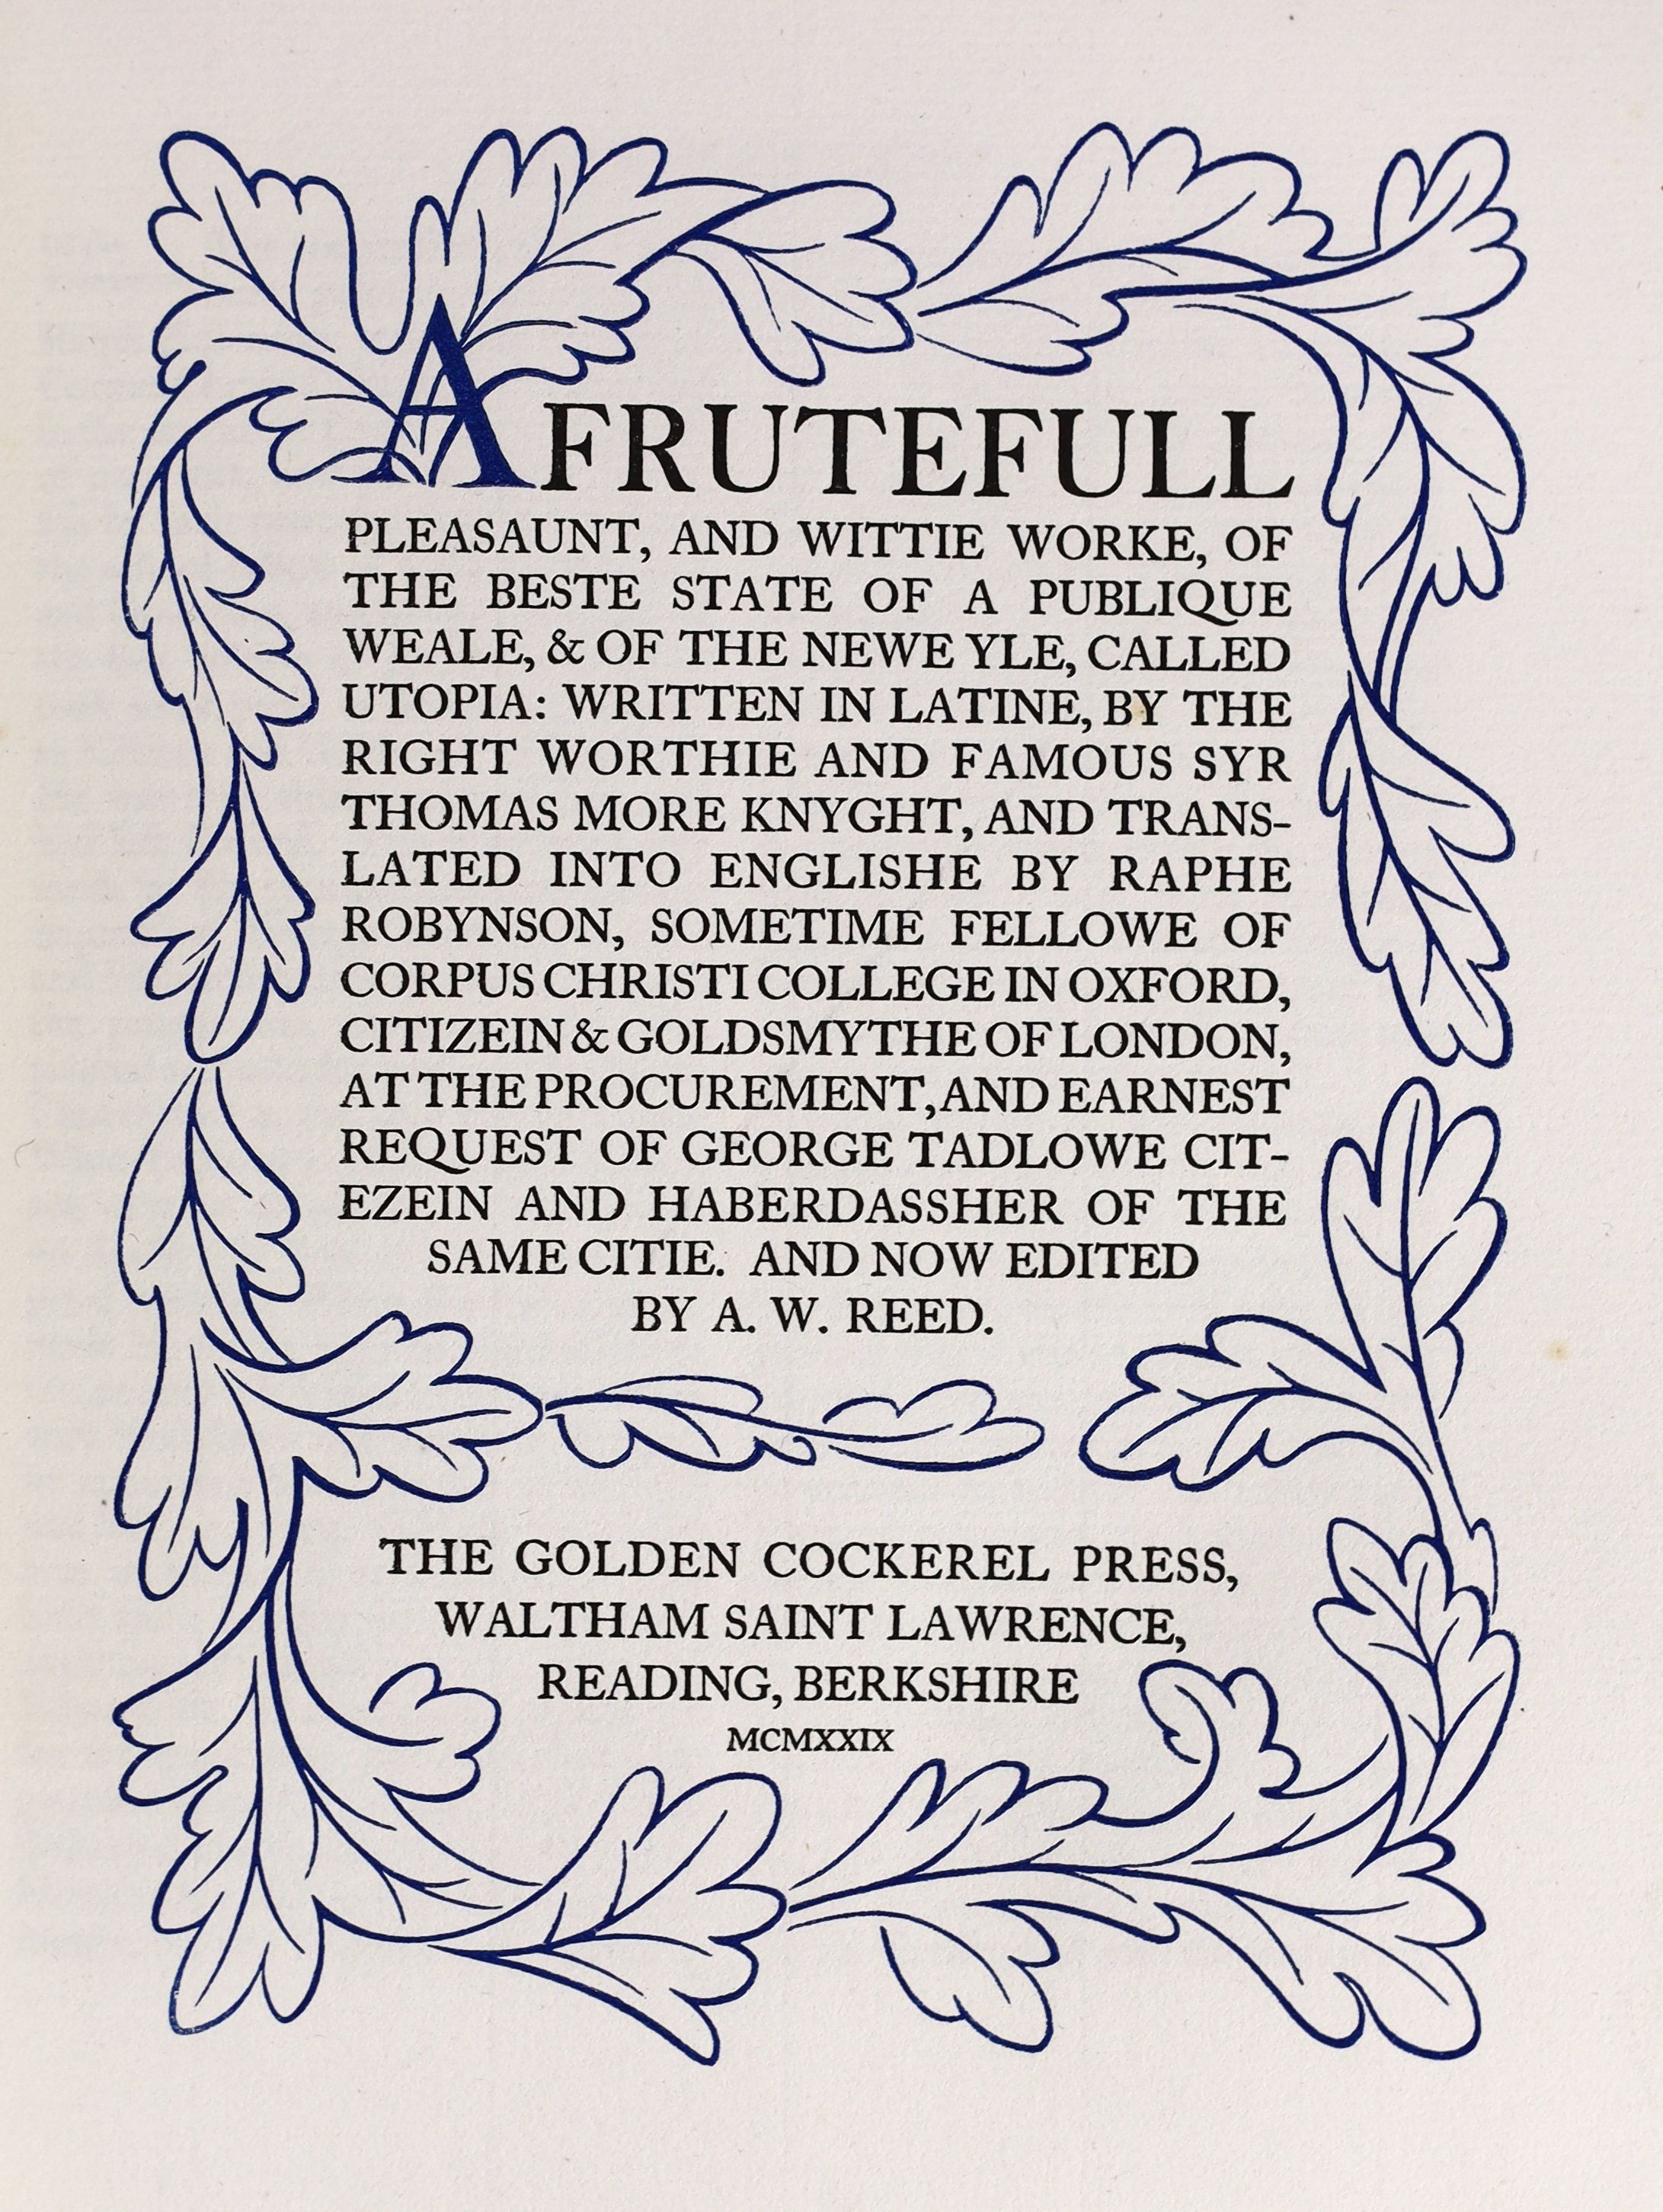 Golden Cockerel Press - Moore, Thomas - Utopia, one of 500, wood-engravings by Eric Gill, 4to, blue buckram gilt, Waltham Saint Lawrence, 1929